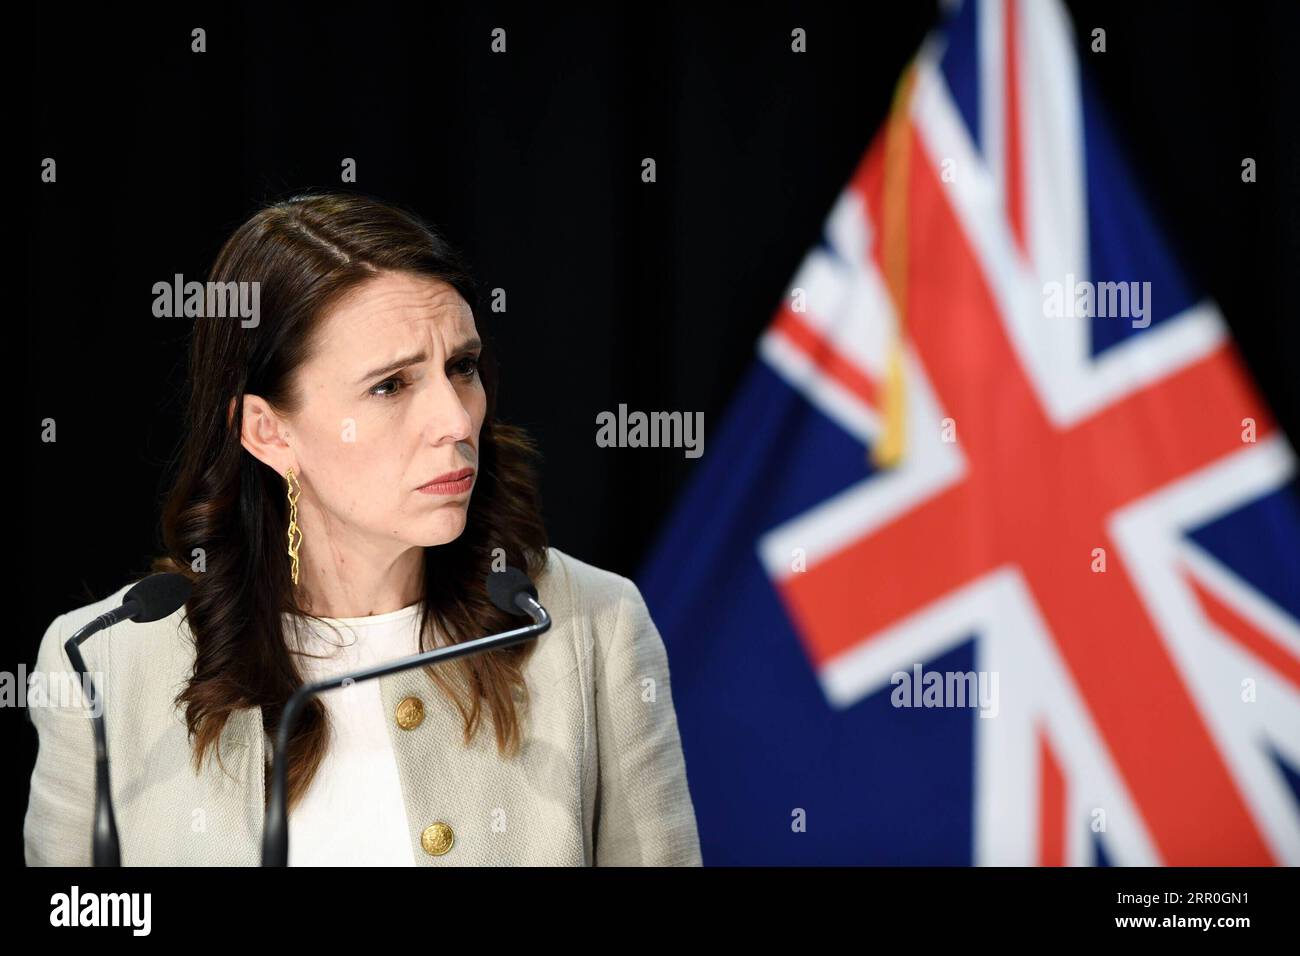 News Bilder des Tages 200814 -- WELLINGTON, Aug. 14, 2020 -- New Zealand Prime Minister Jacinda Ardern attends a press conference in Wellington, New Zealand, Aug. 14, 2020. New Zealand s largest city Auckland will remain in COVID-19 Alert Level 3 for 12 more days, with the rest of the country staying in Alert Level 2, as there are currently 36 active cases, 17 of which are linked to the recent community transmission in Auckland.  NEW ZEALAND-WELLINGTON-COVID-19-PRESS CONFERENCE GuoxLei PUBLICATIONxNOTxINxCHN Stock Photo